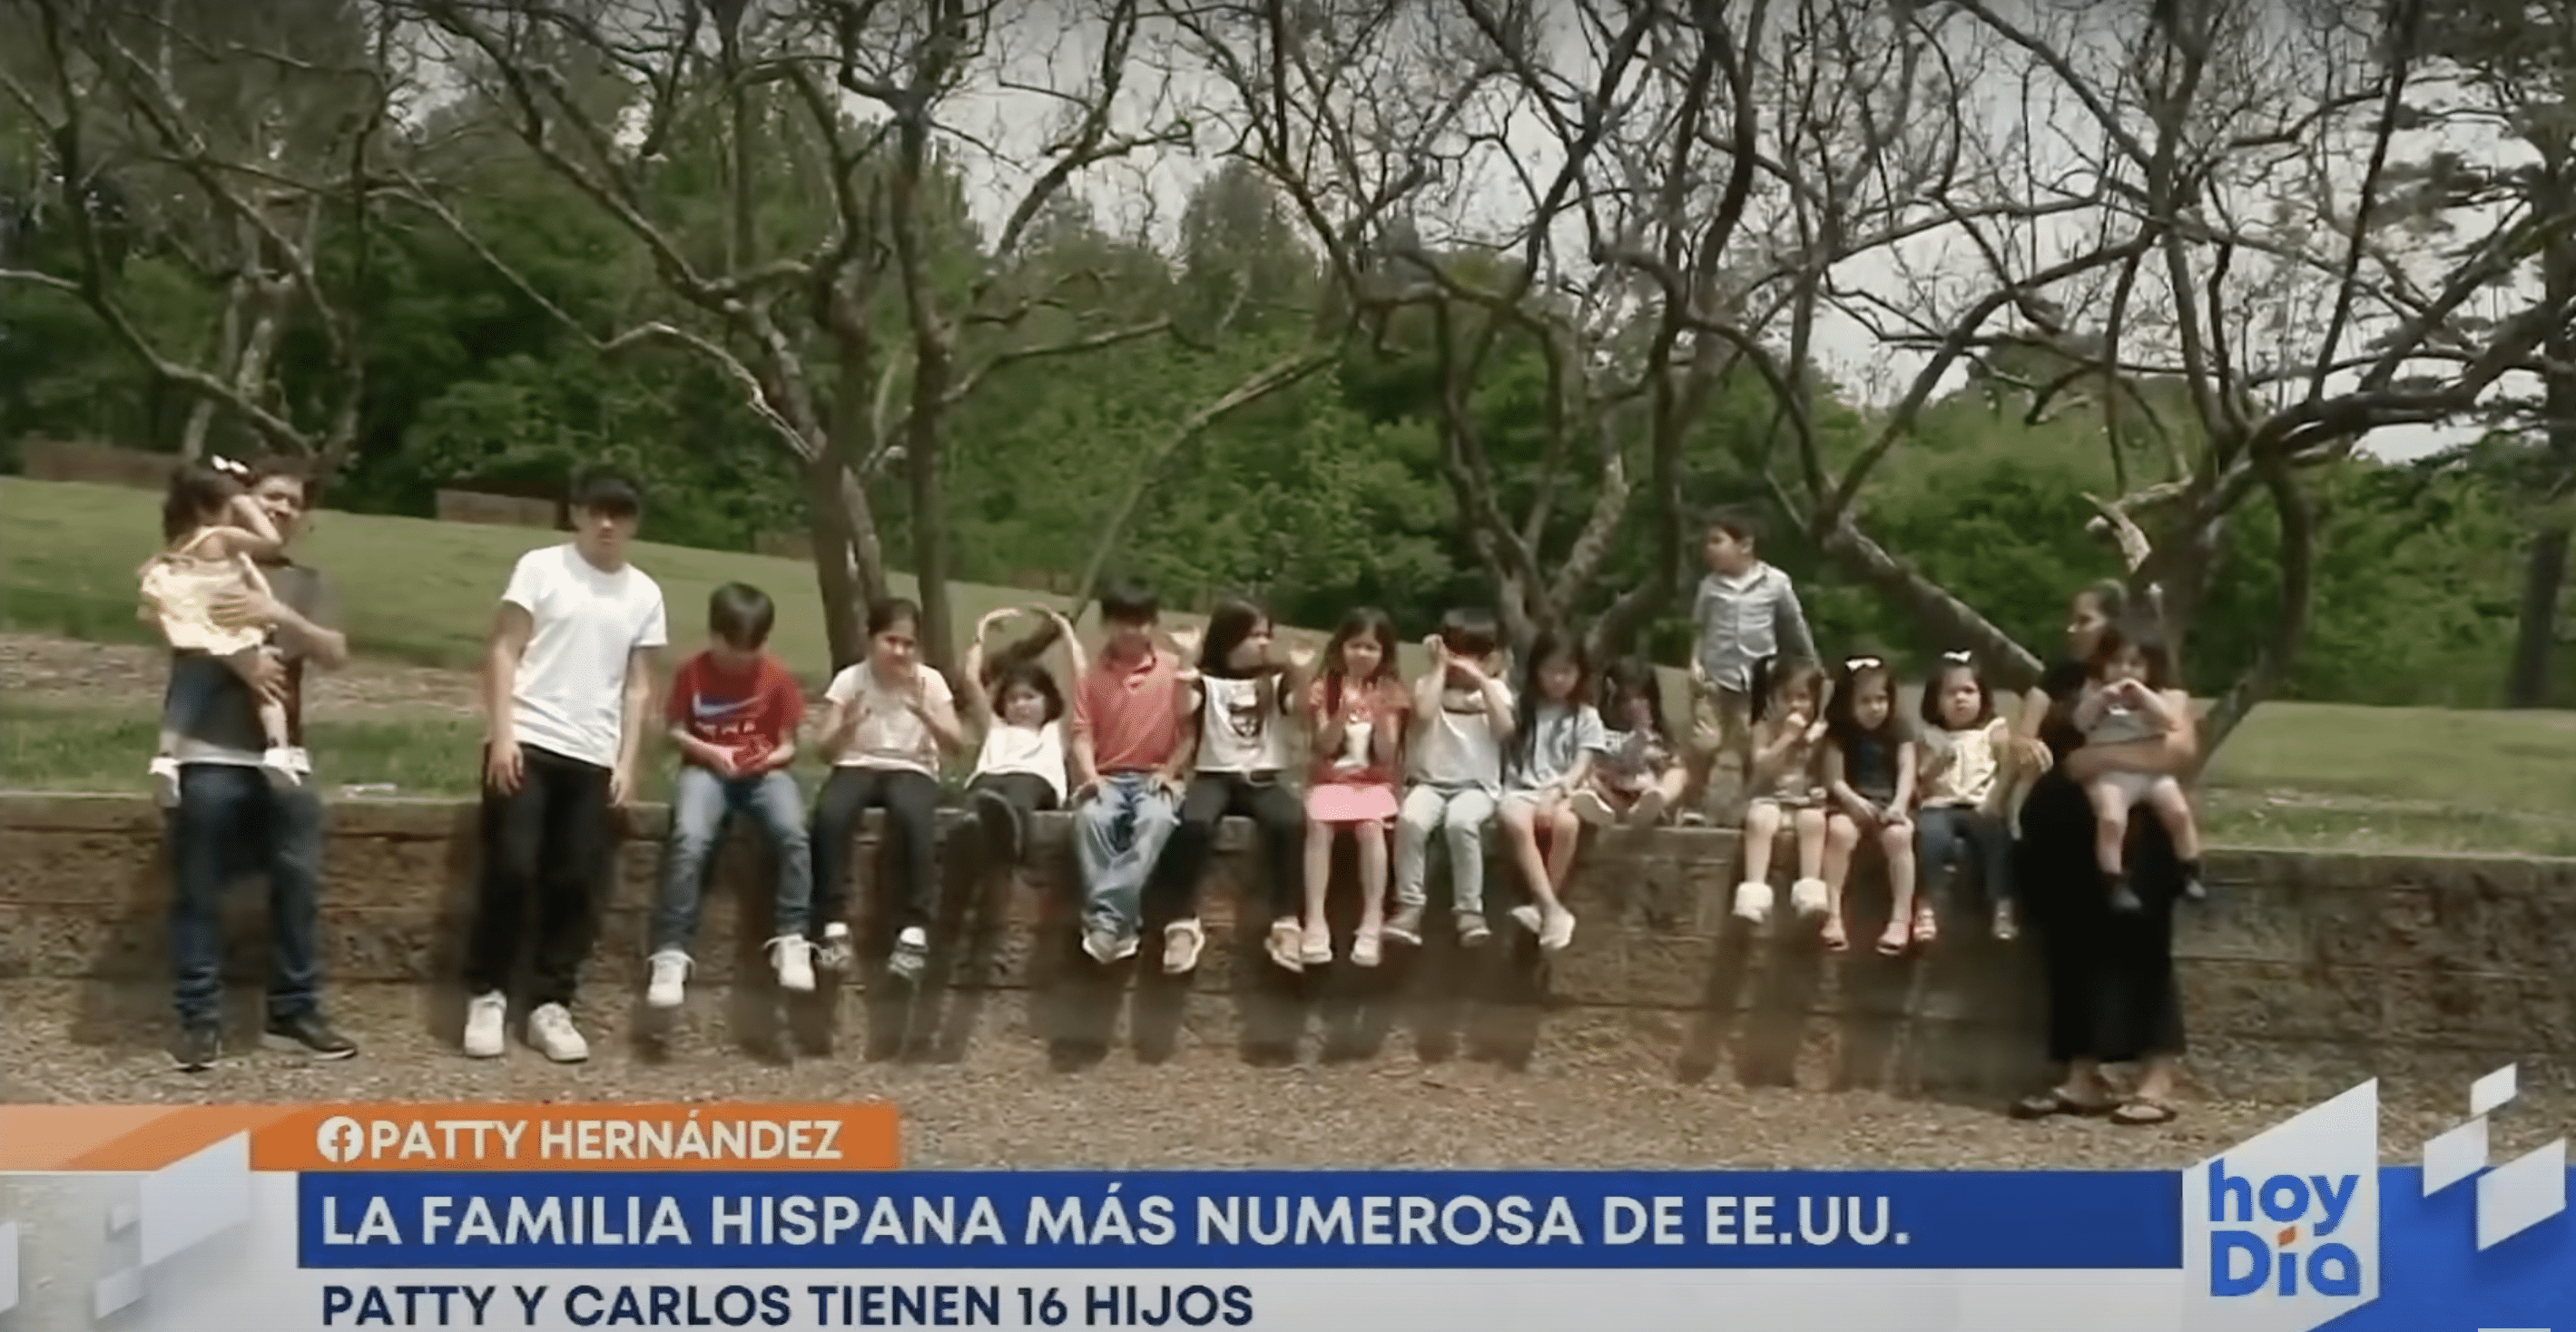 Patty and Carlos Hernandez are pictured with their 16 children. | Source: YouTube.com/hoy Día